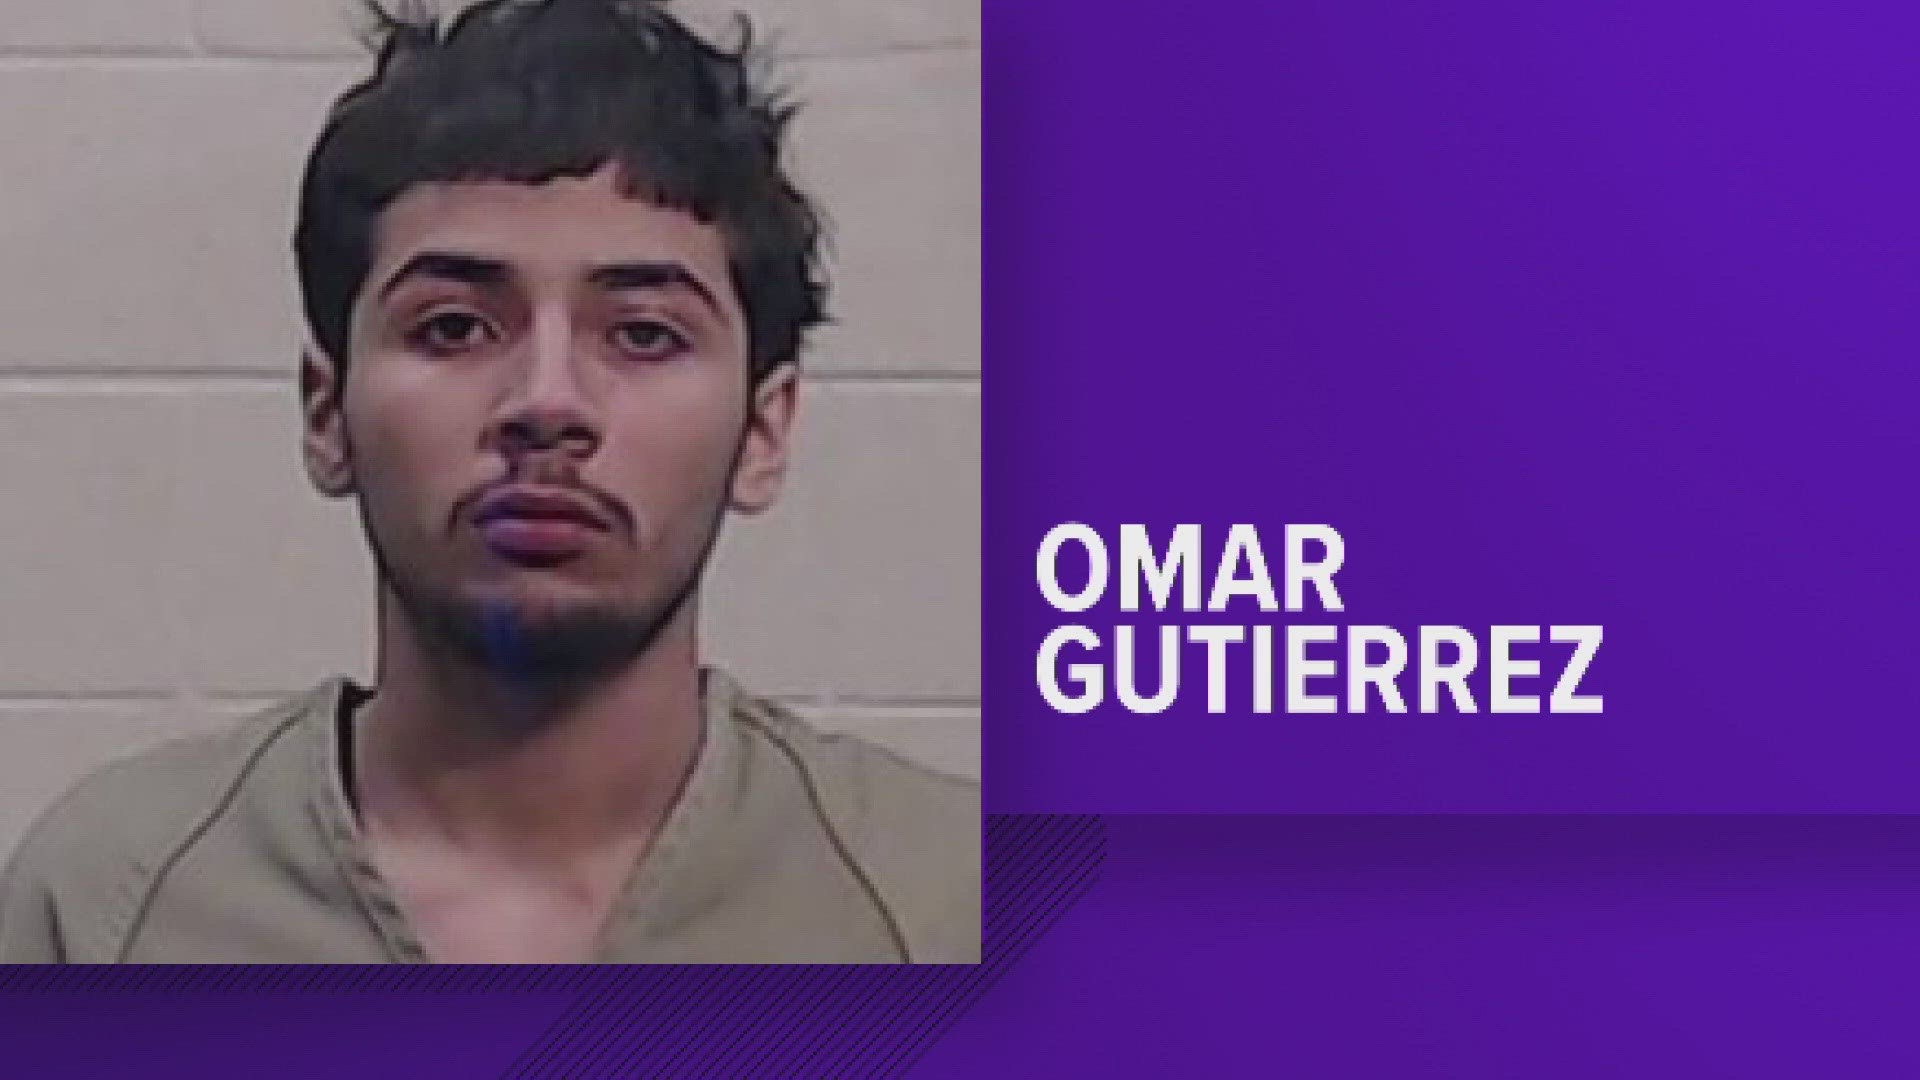 Brothers Omar Matthew Gutierrez and Omar Elijah Gutierrez allegedly stole a gold necklace and a brown leather belt and buckle from a man near Odessa High School.